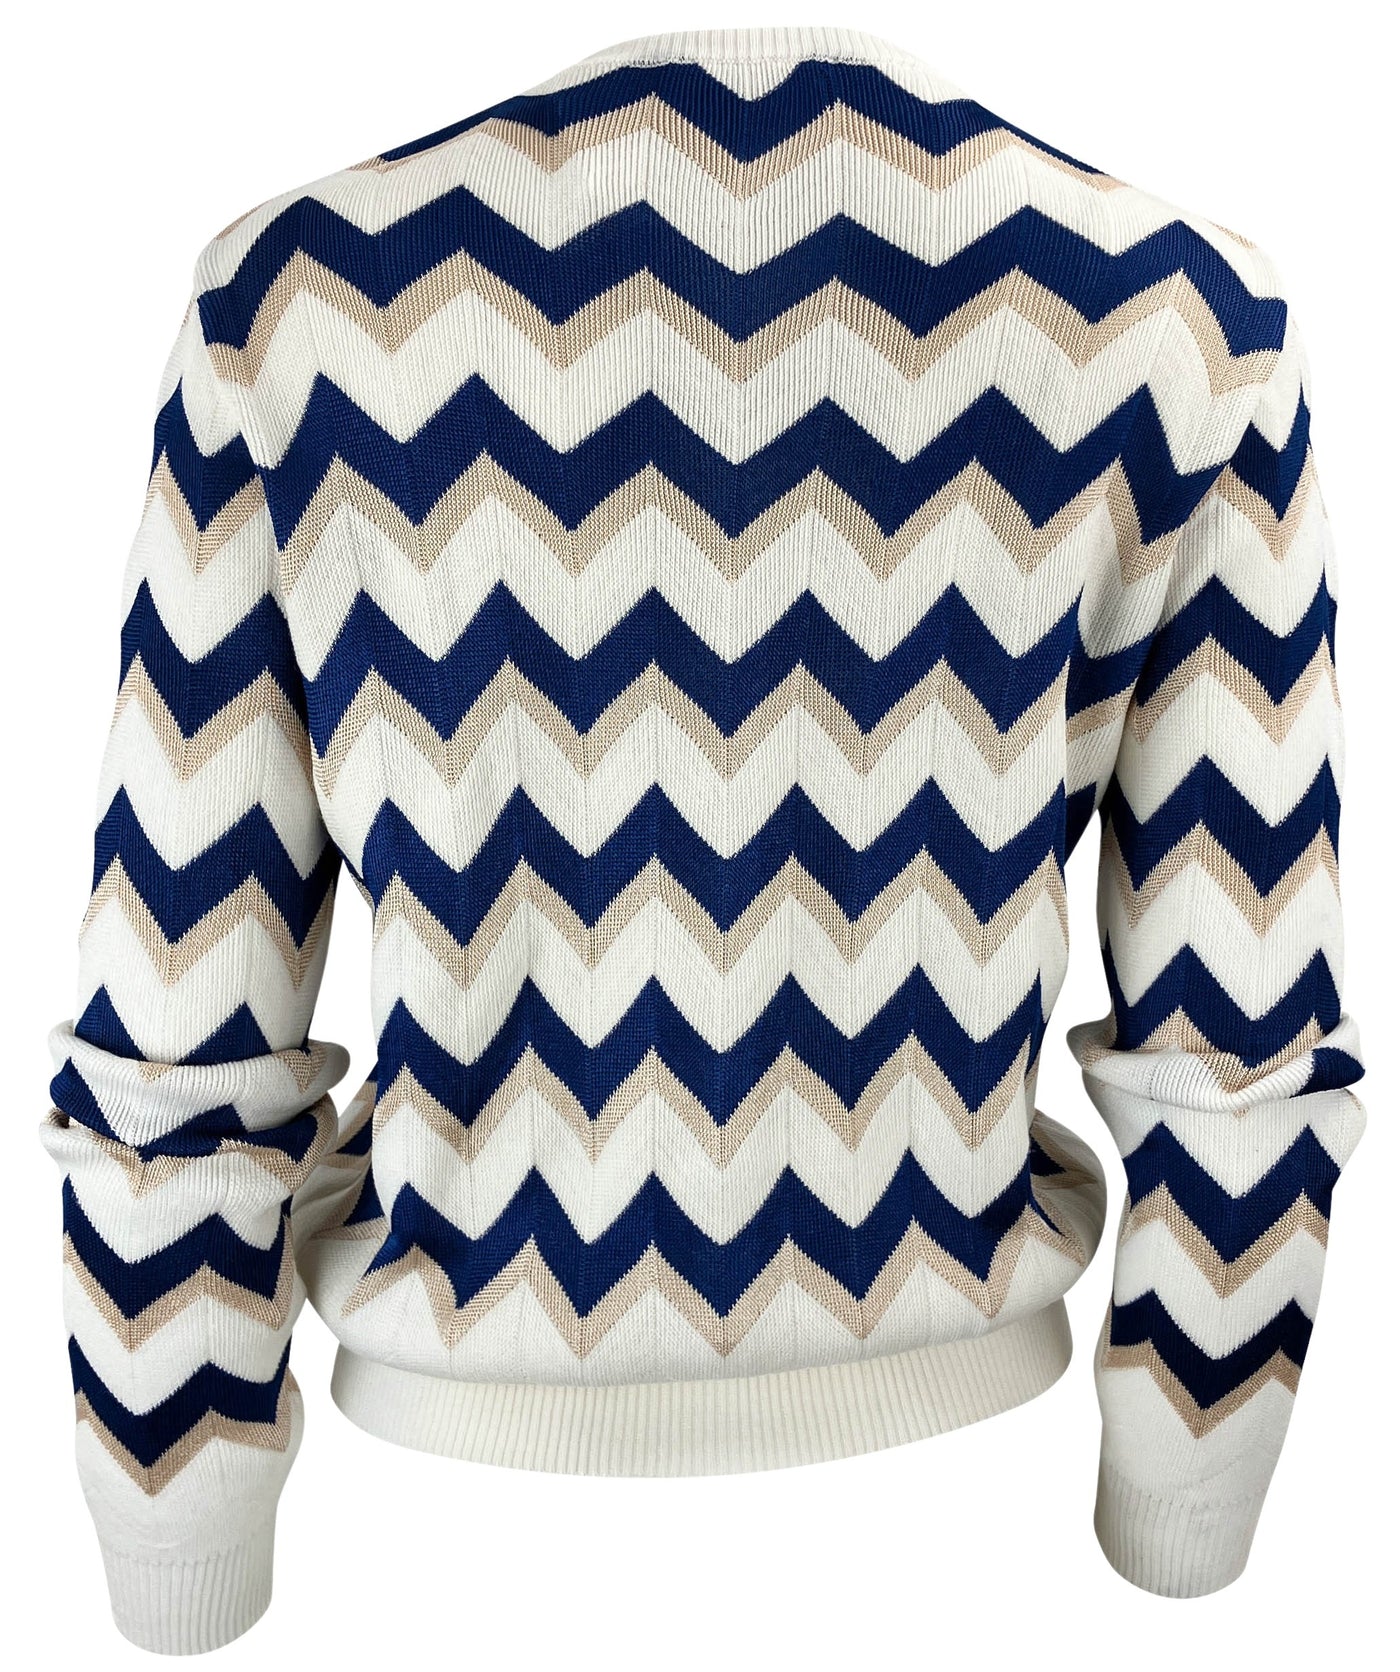 Missoni Chevron Print Cardigan in White, Navy and Tan - Discounts on Missoni at UAL